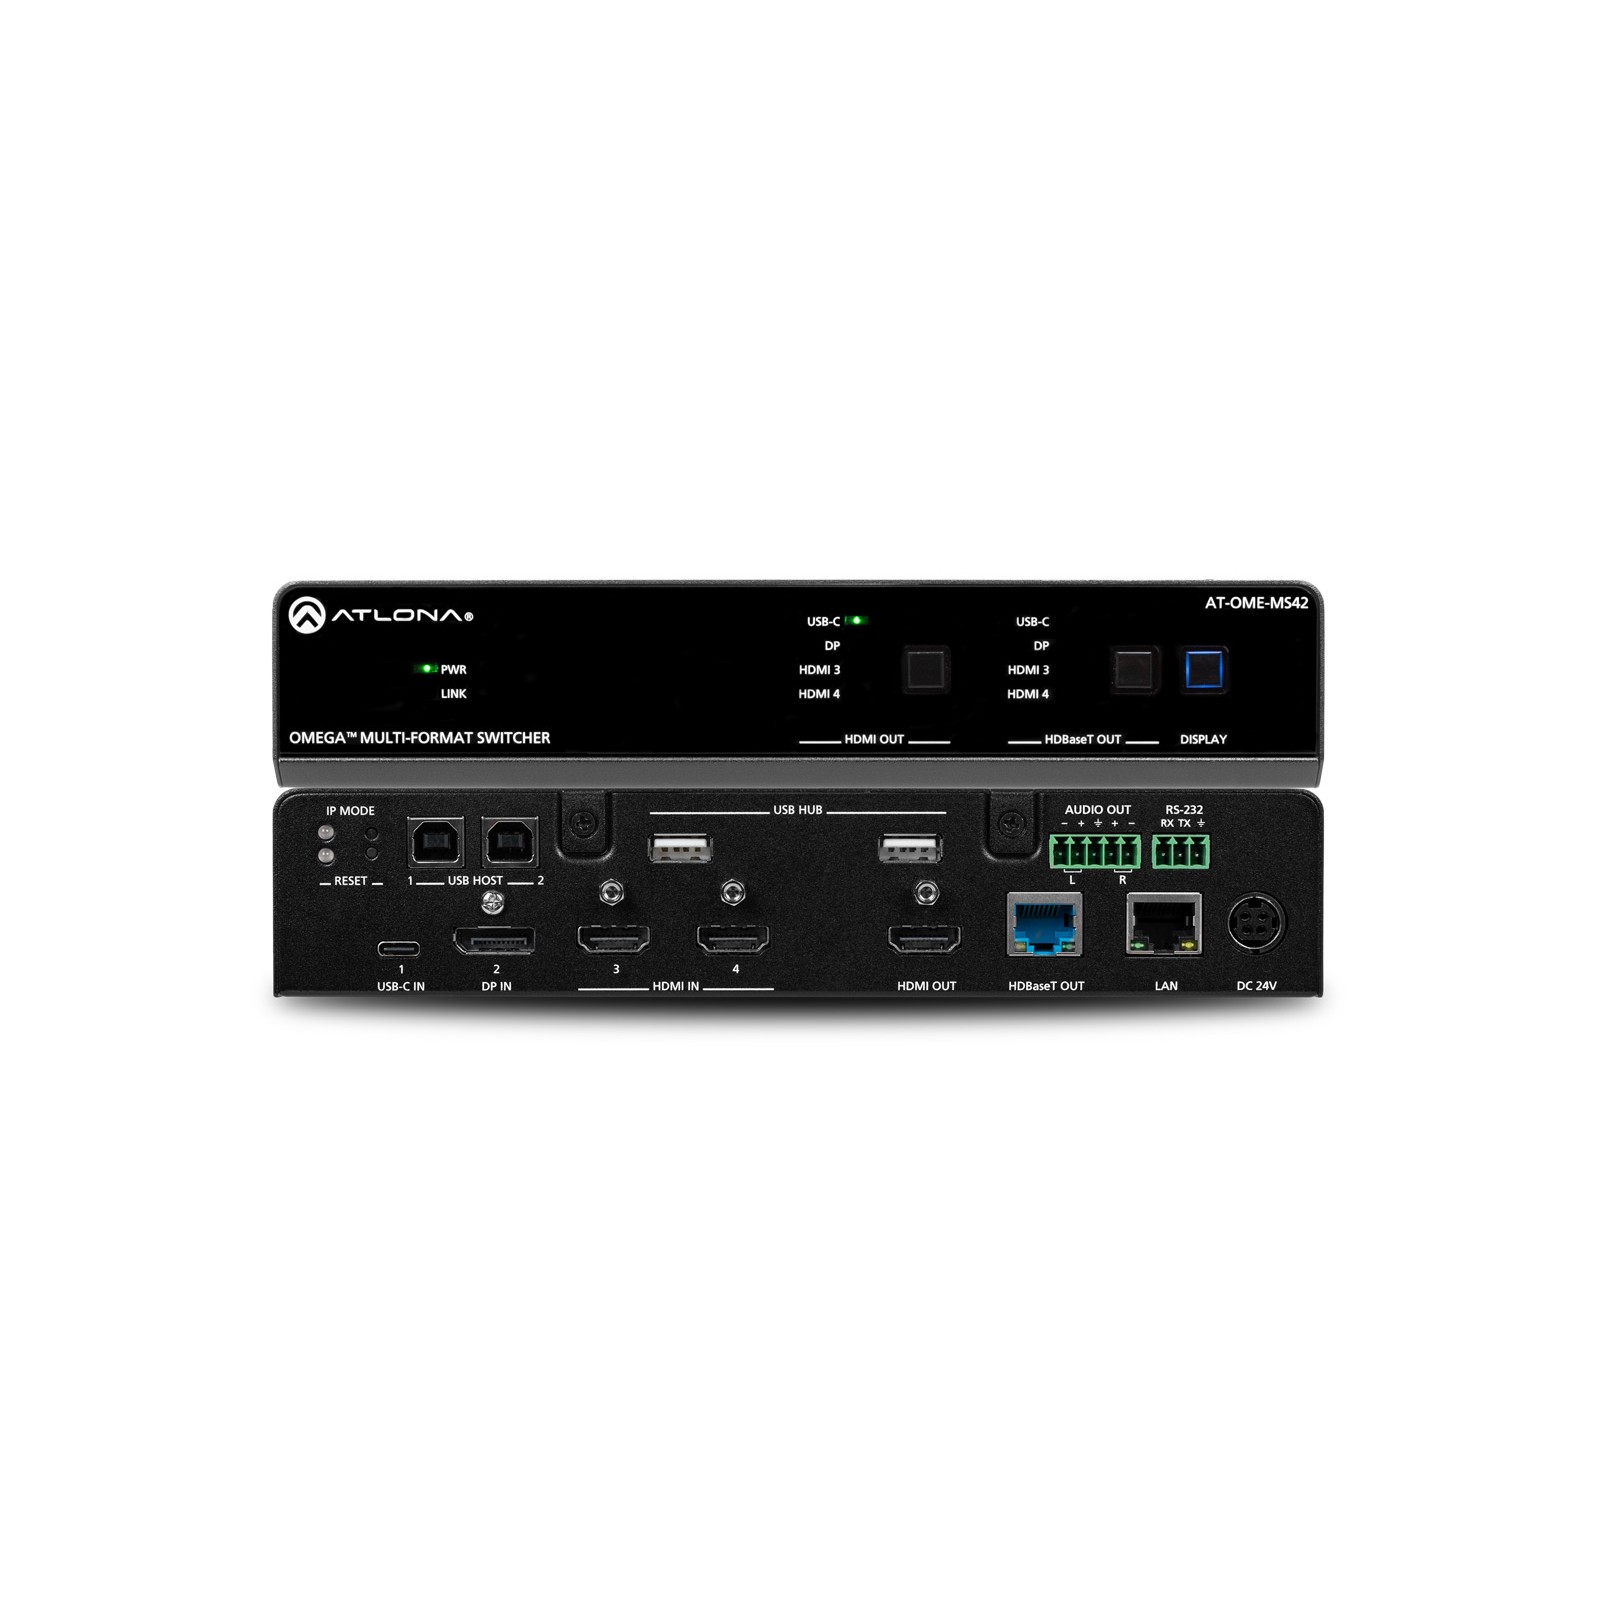 Atlona AT-OME-MS42 Multiformat Switcher / Scaler - 4 x 2